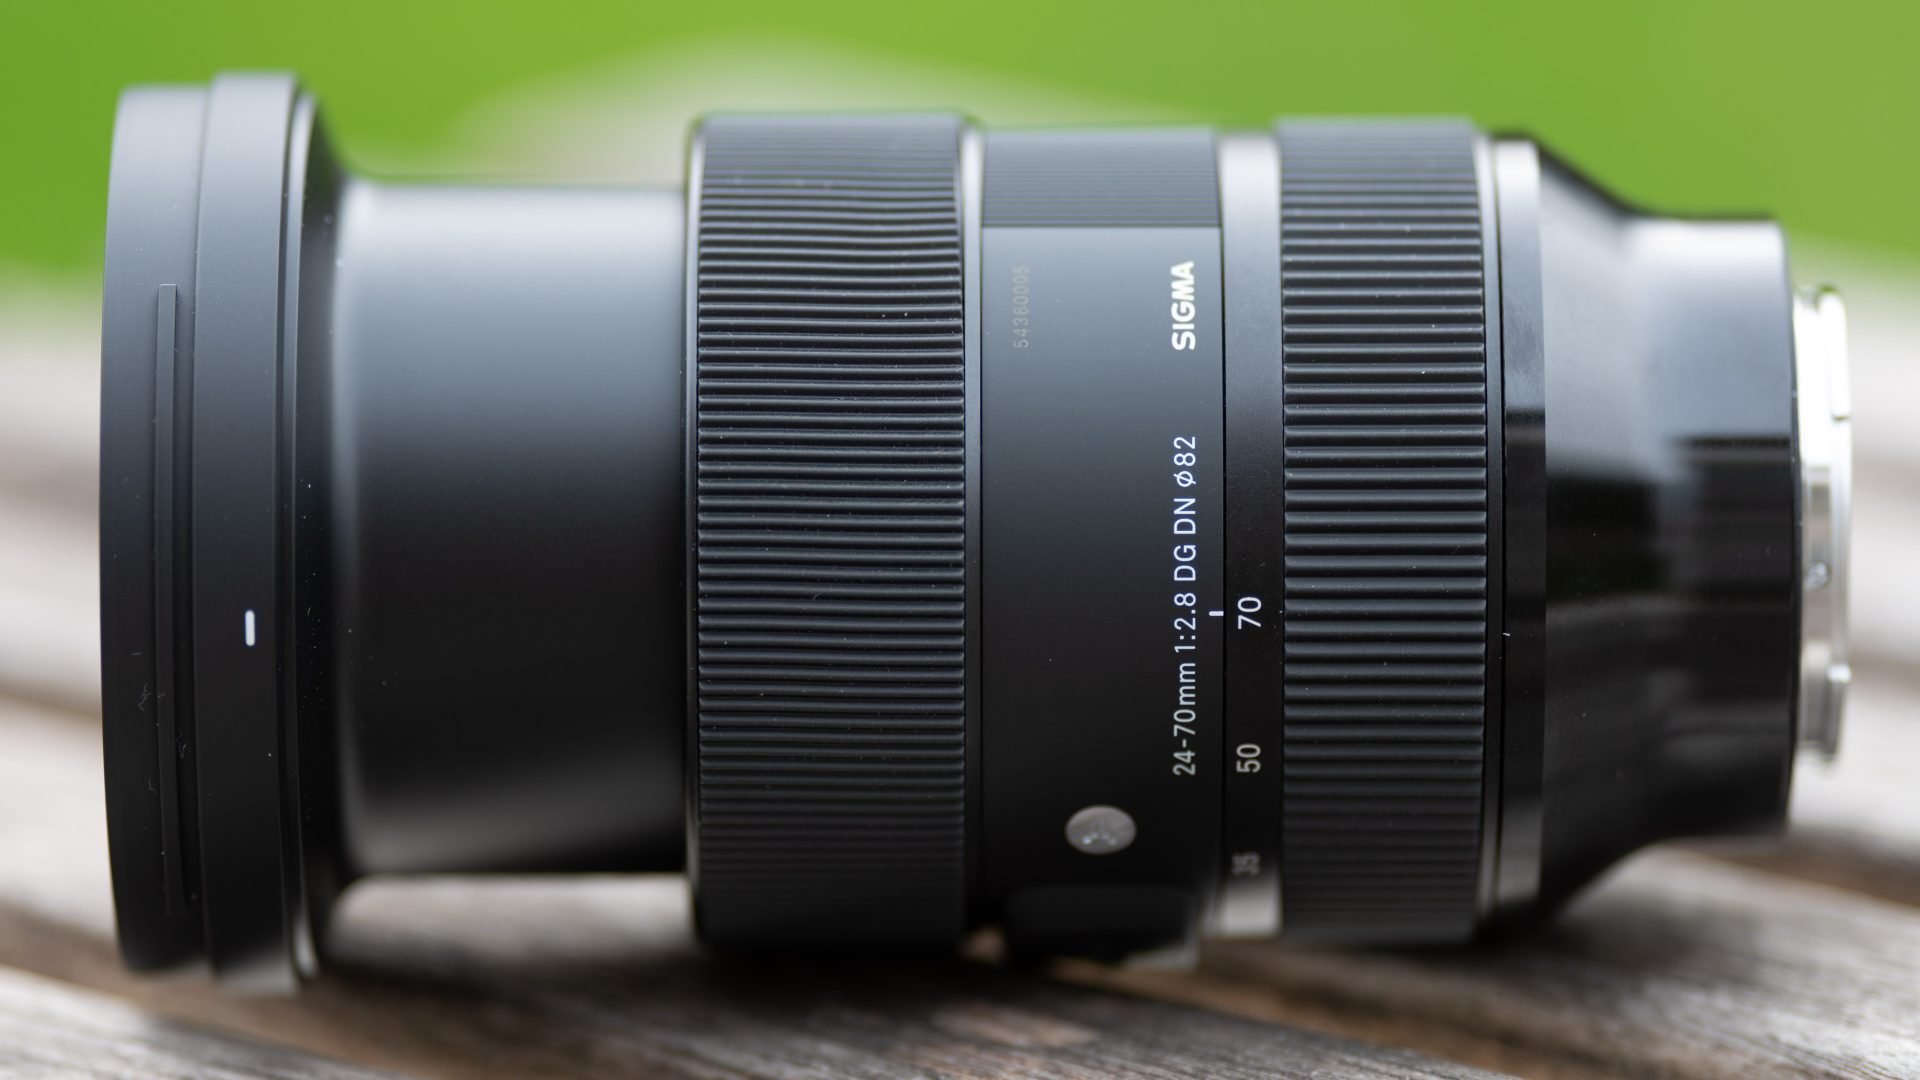 Sigma 24-70mm f2.8 DG DN Art review | Cameralabs